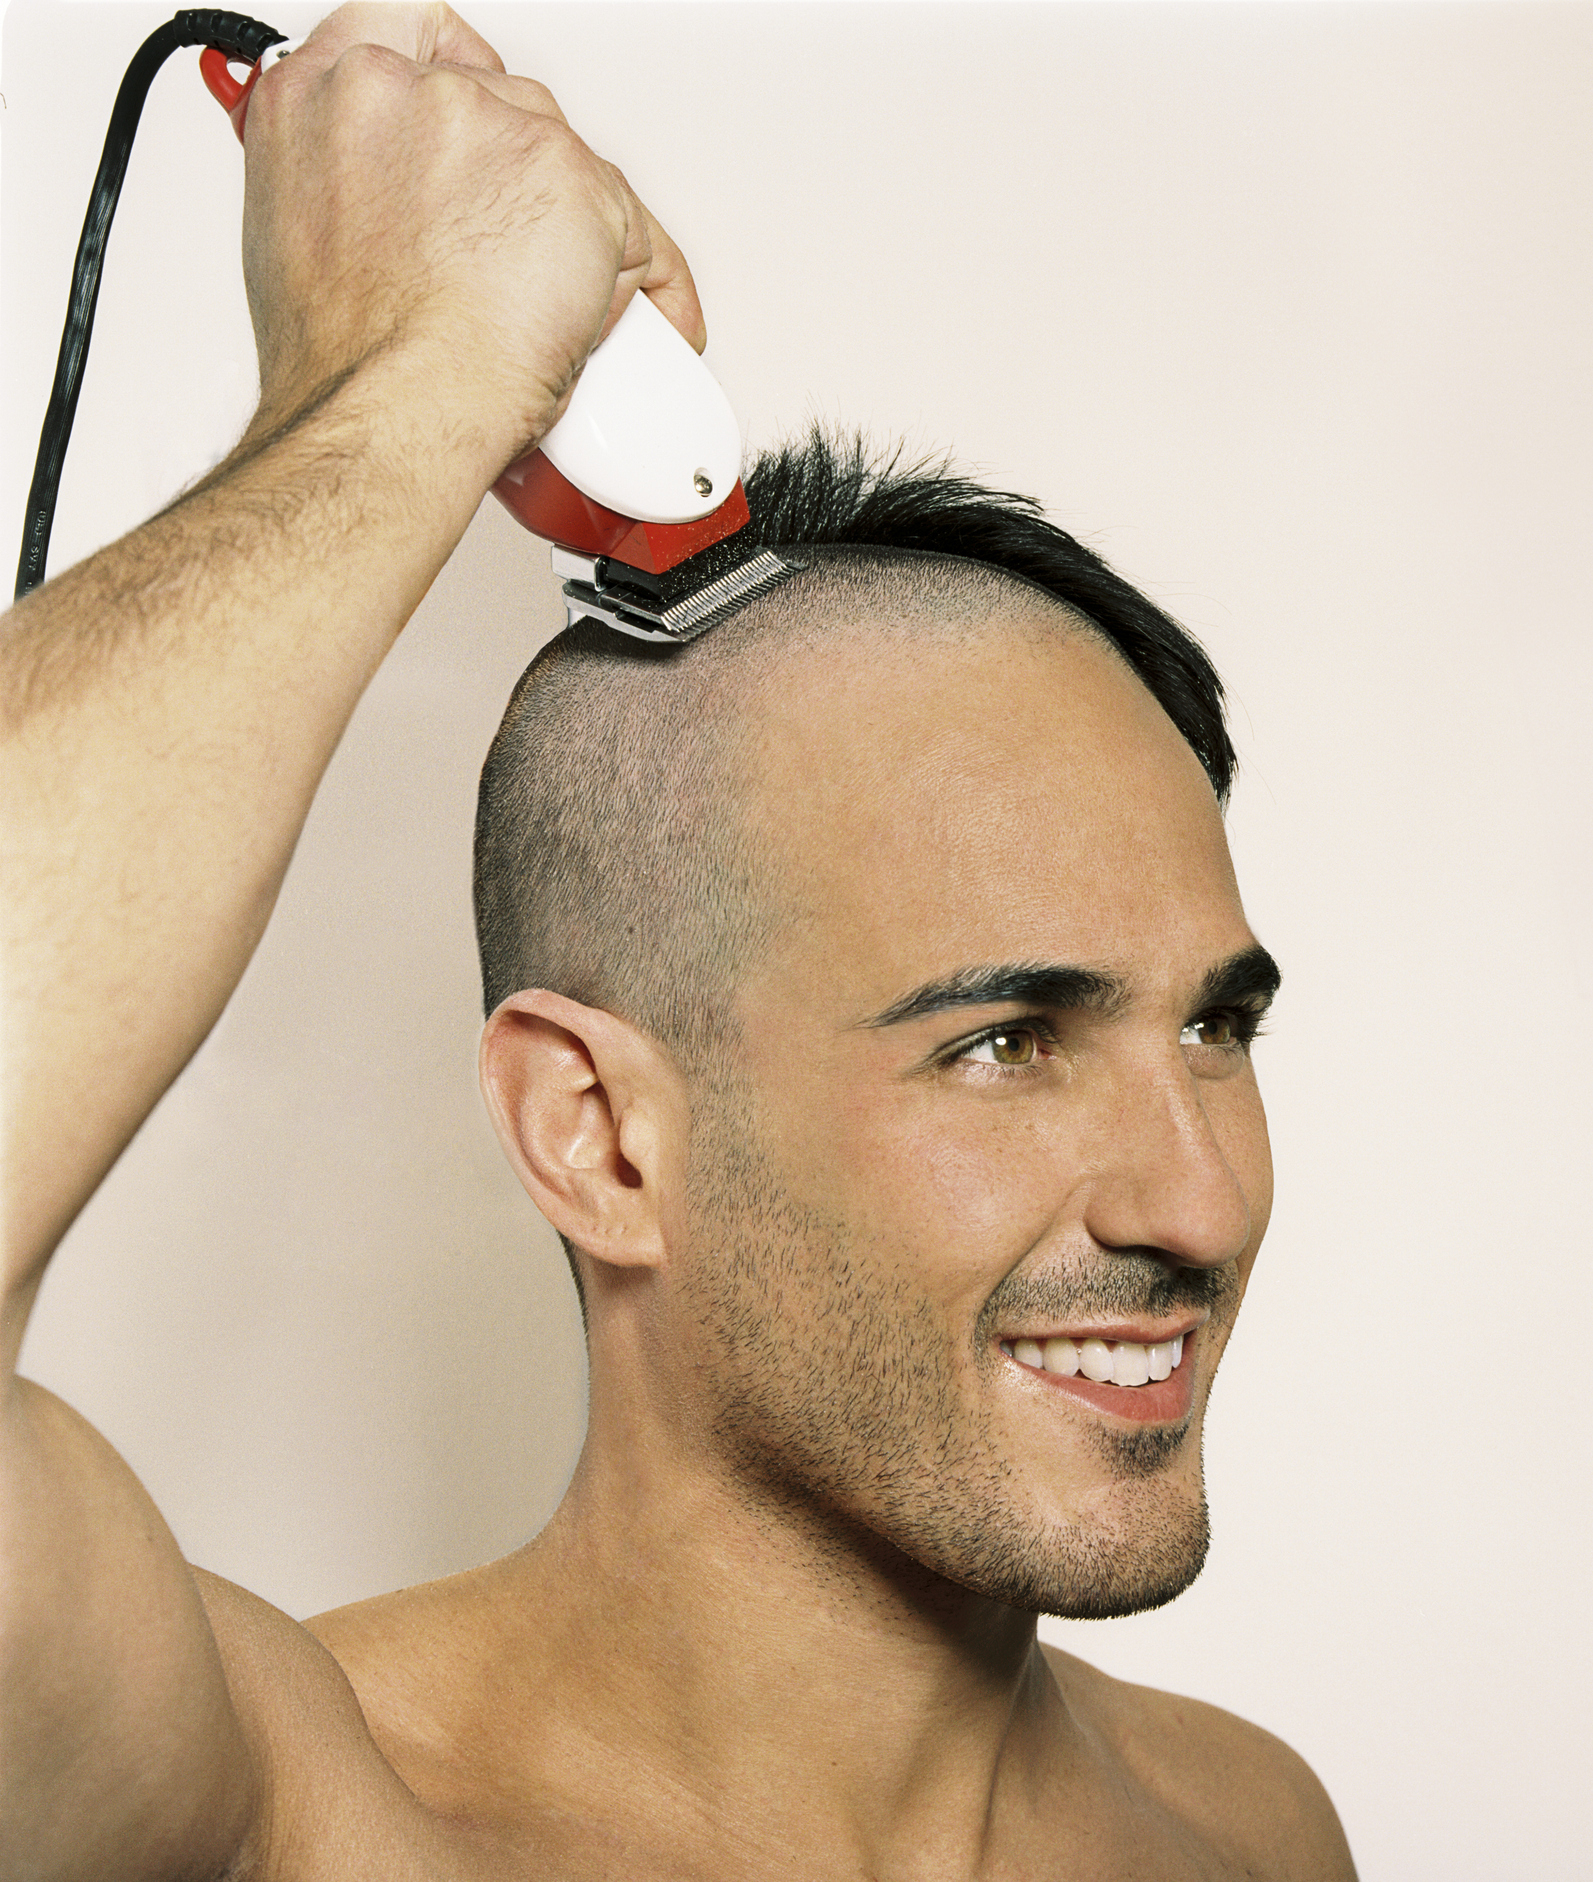 Person shaving head with electric clippers, visible hair growth on sides, smiling